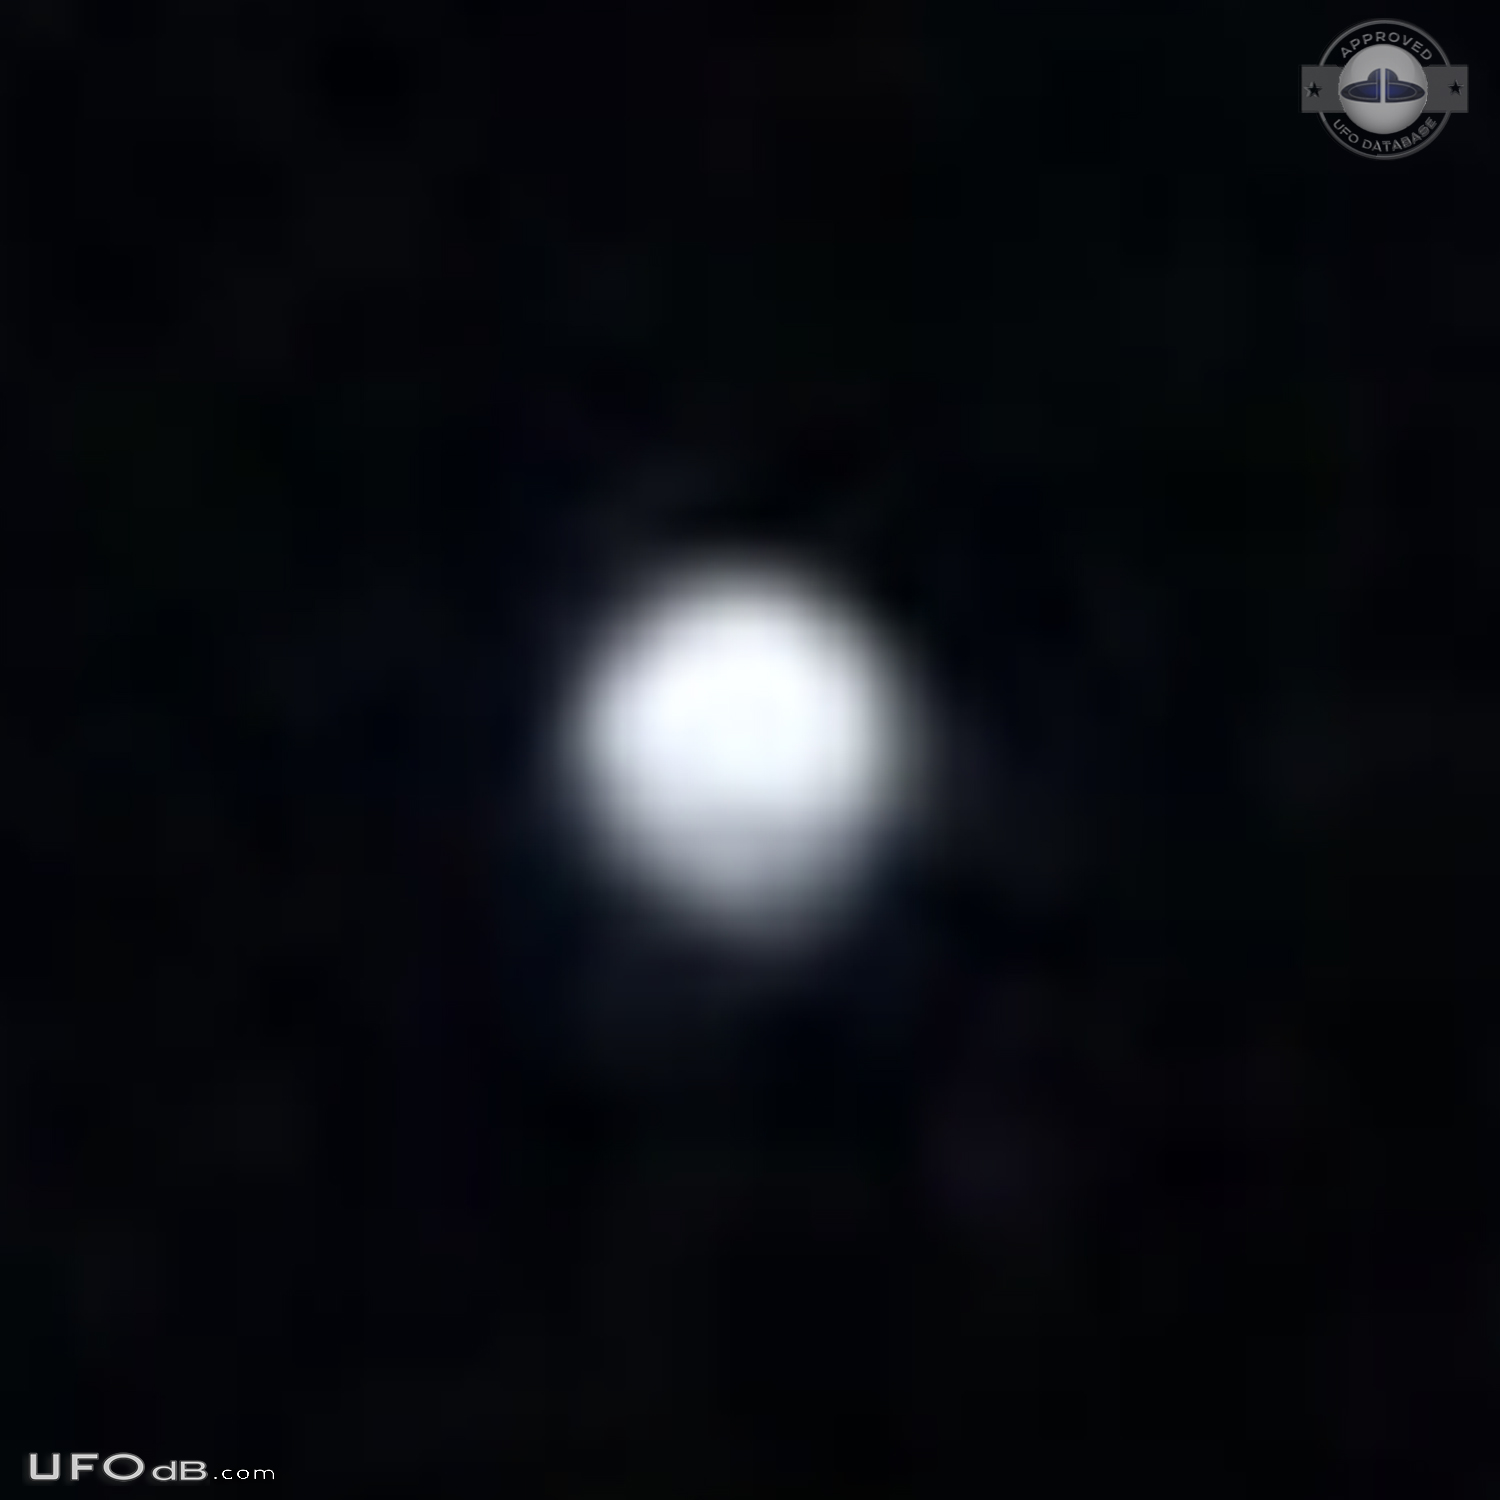 Was curious , below a star seemed there was a UFO Toronto Ontario Cana UFO Picture #784-5